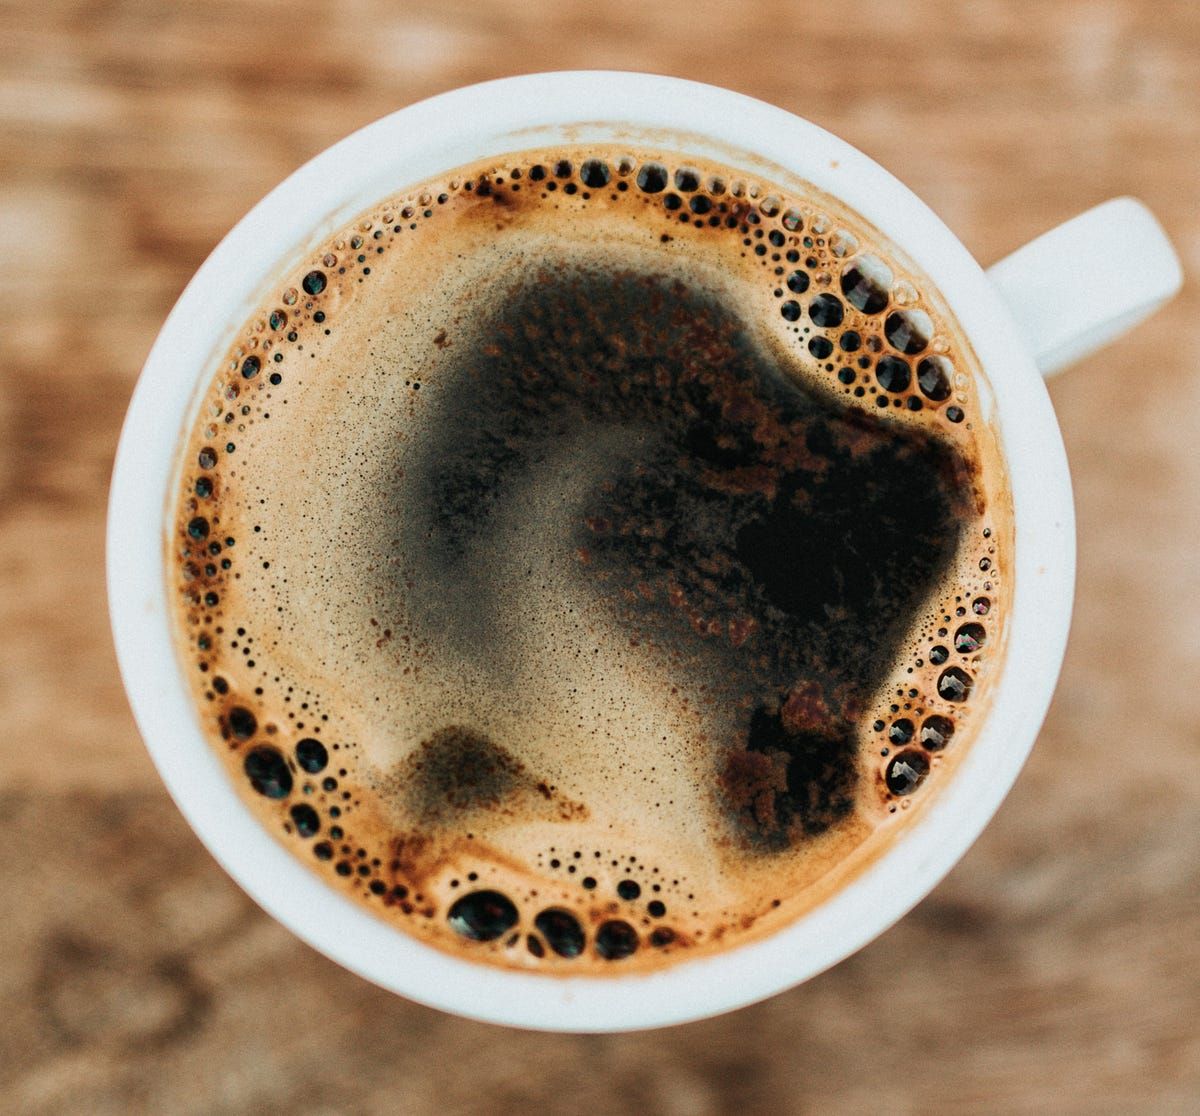 THE SURPRISING TRUTHS ABOUT YOUR MORNING COFFEE - Urbanized Beauty - Medium